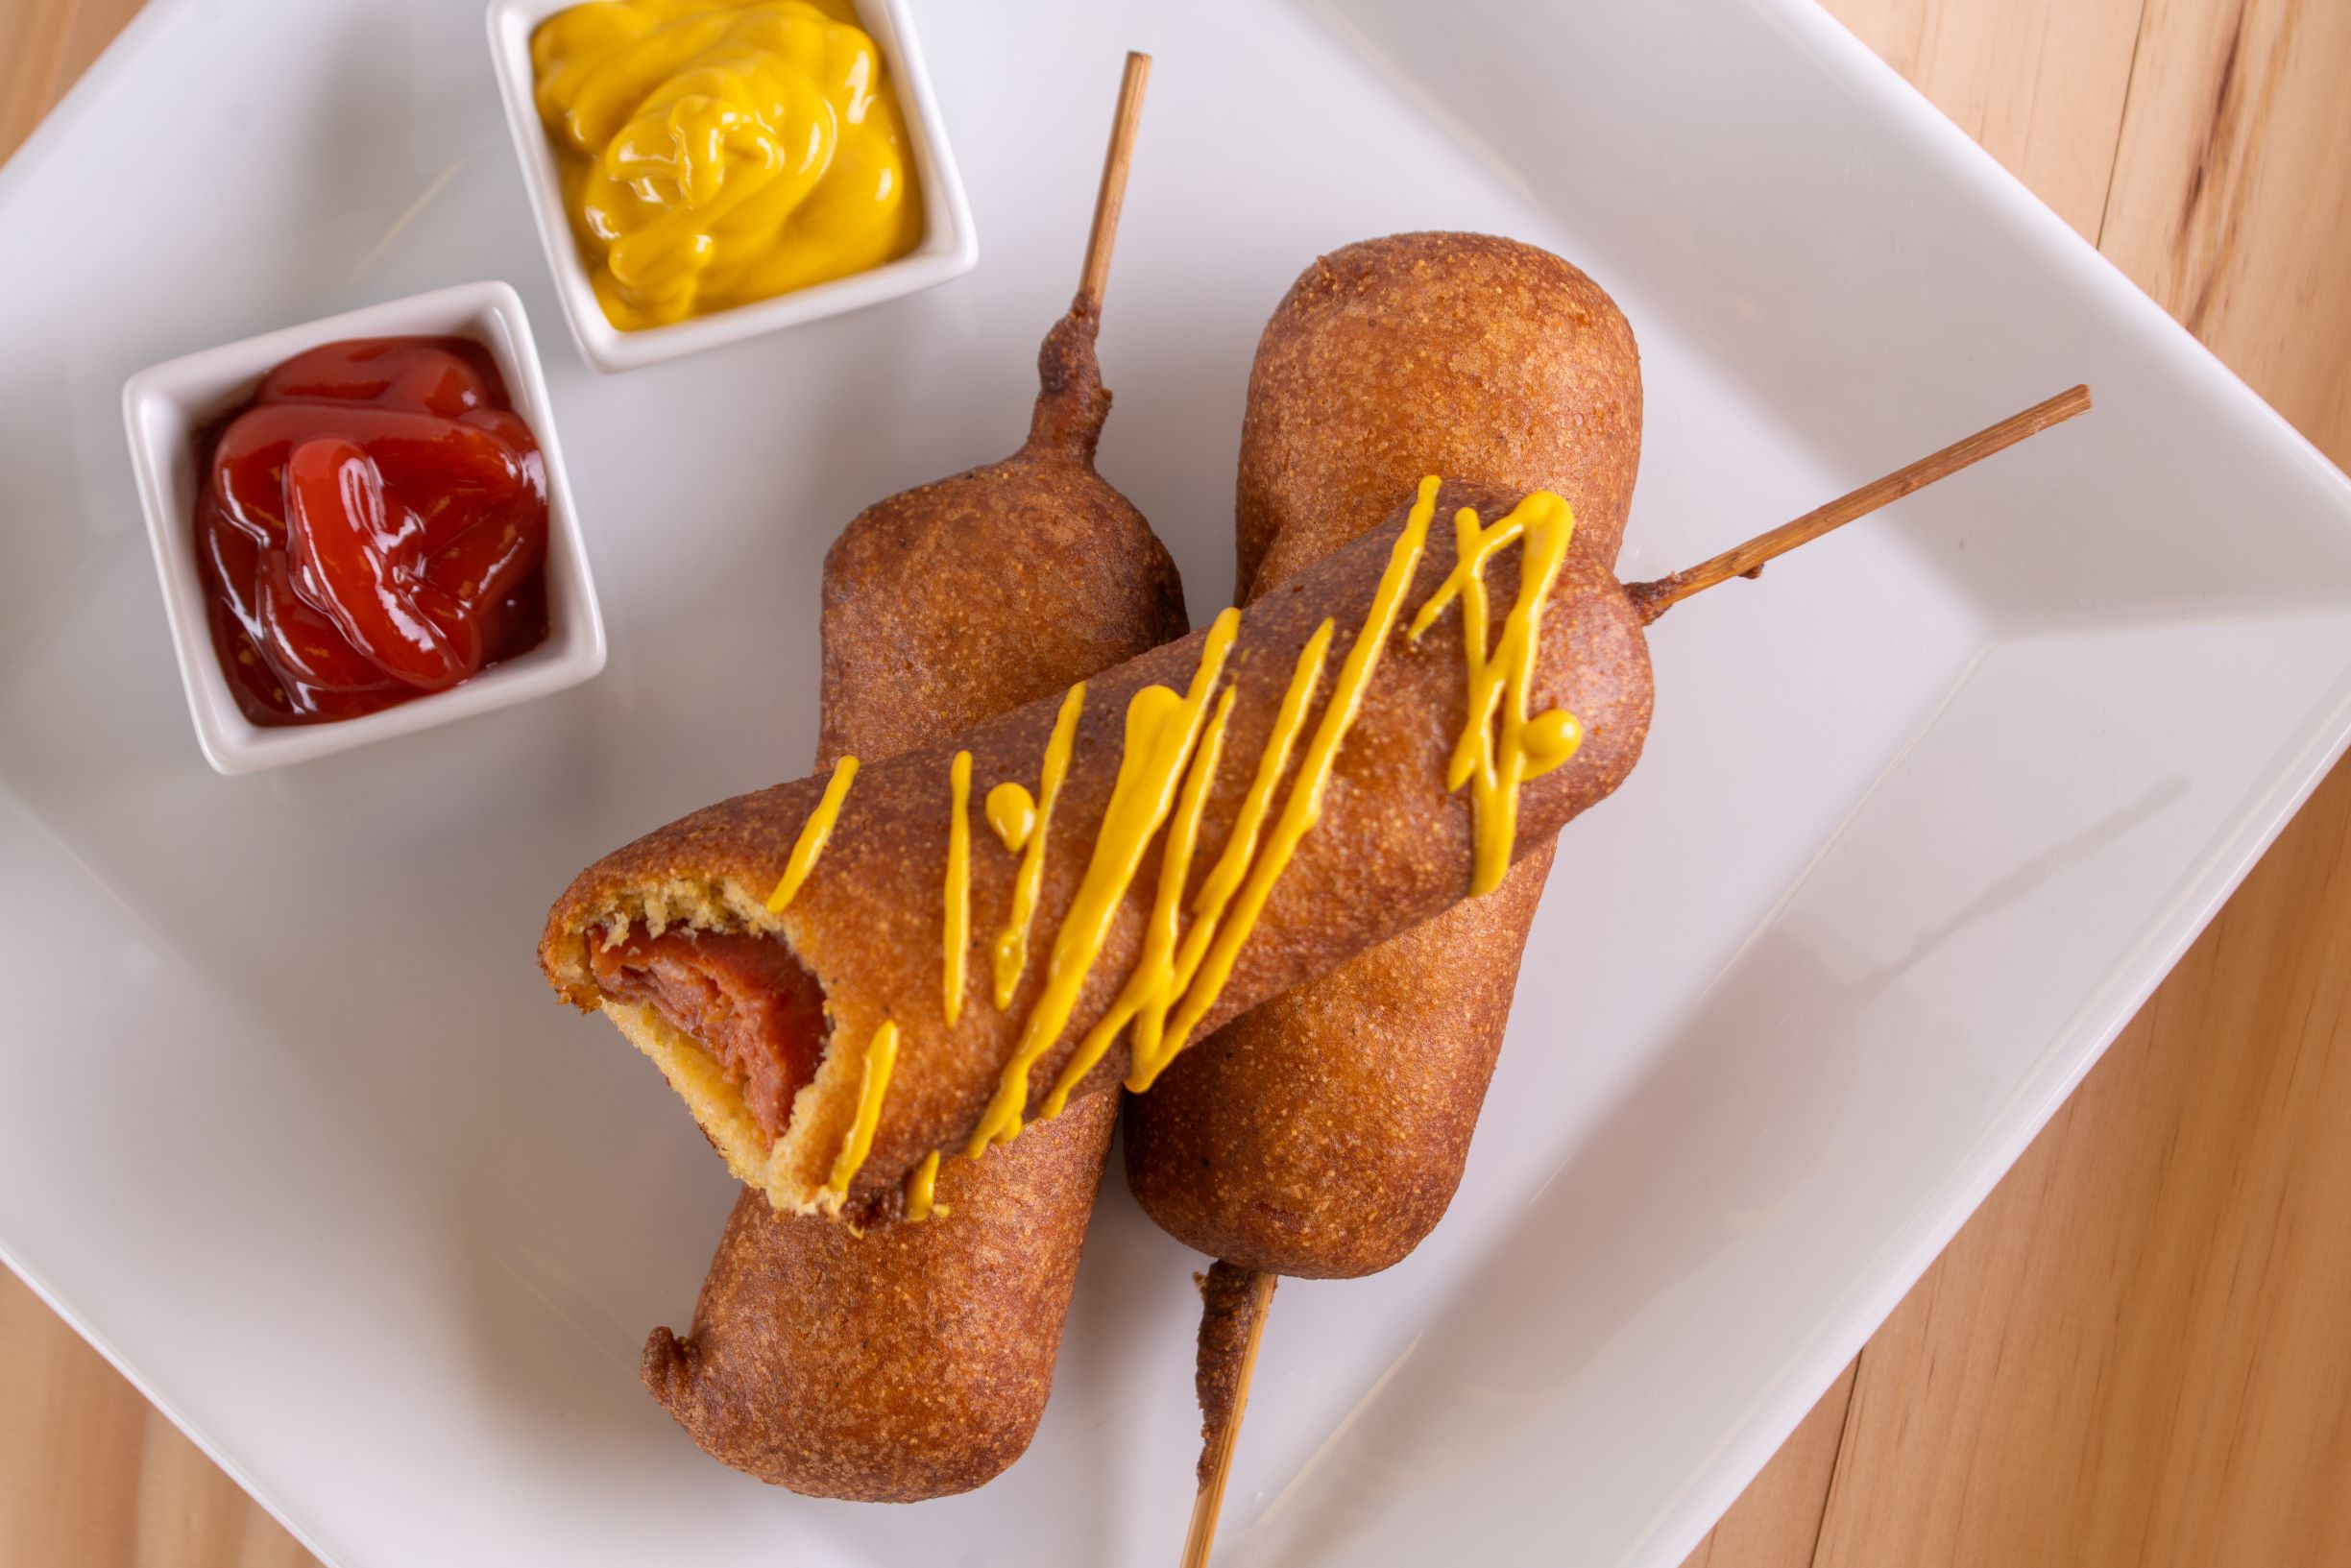 3 andouille corndogs stacked on top of each other with one having a bite taken out of it and drizzled in mustard, next to 2 containers of ketchup and mustard for dipping